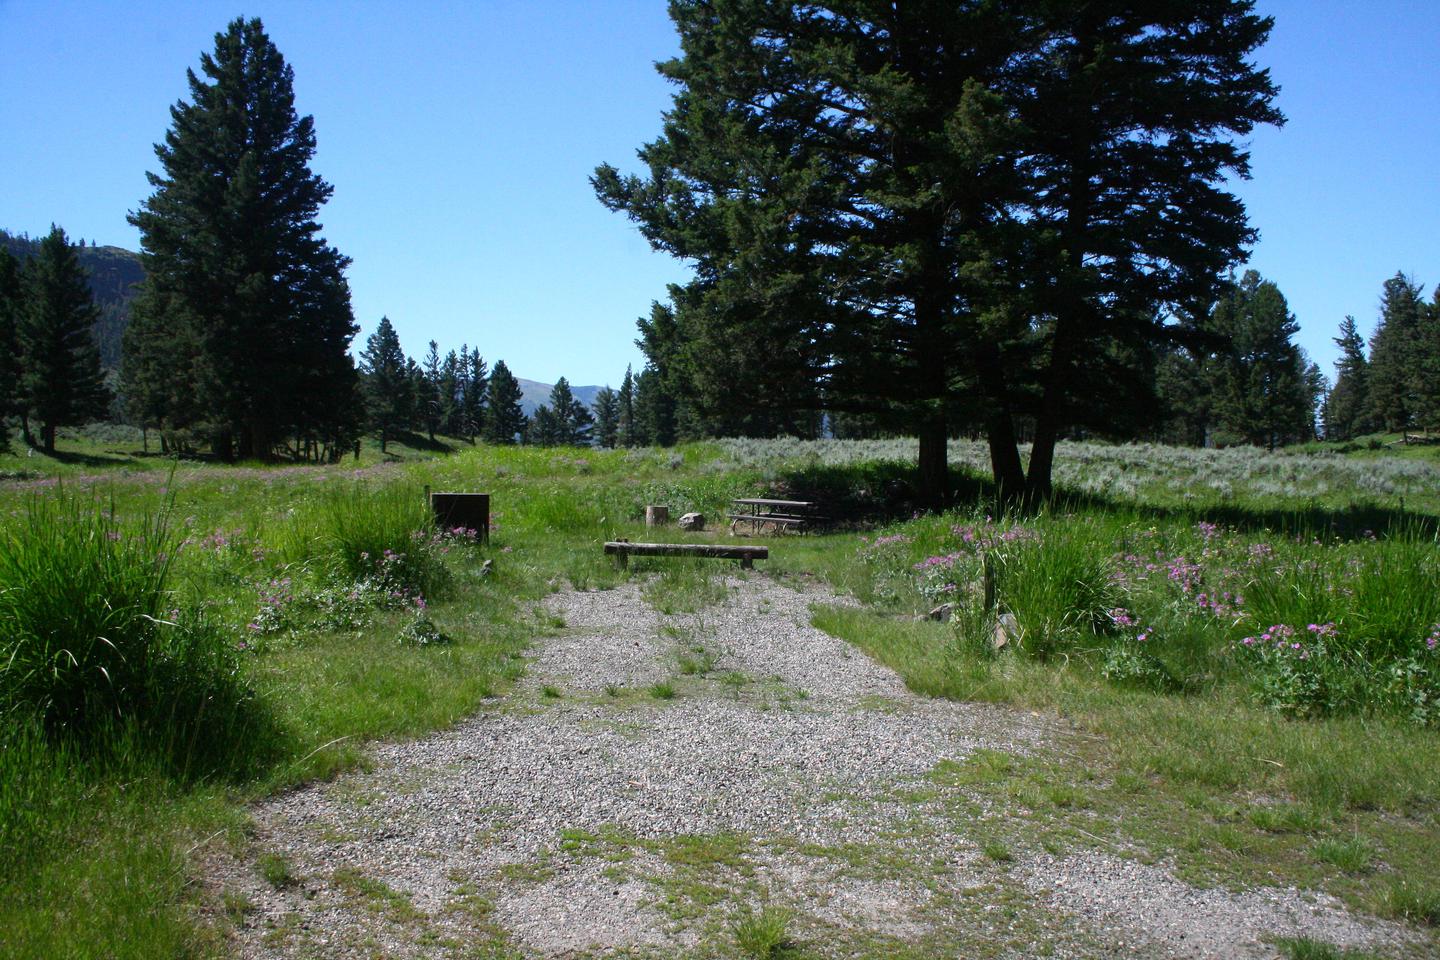 Slough Creek Campground Site #8..Slough Creek Campground Site #8